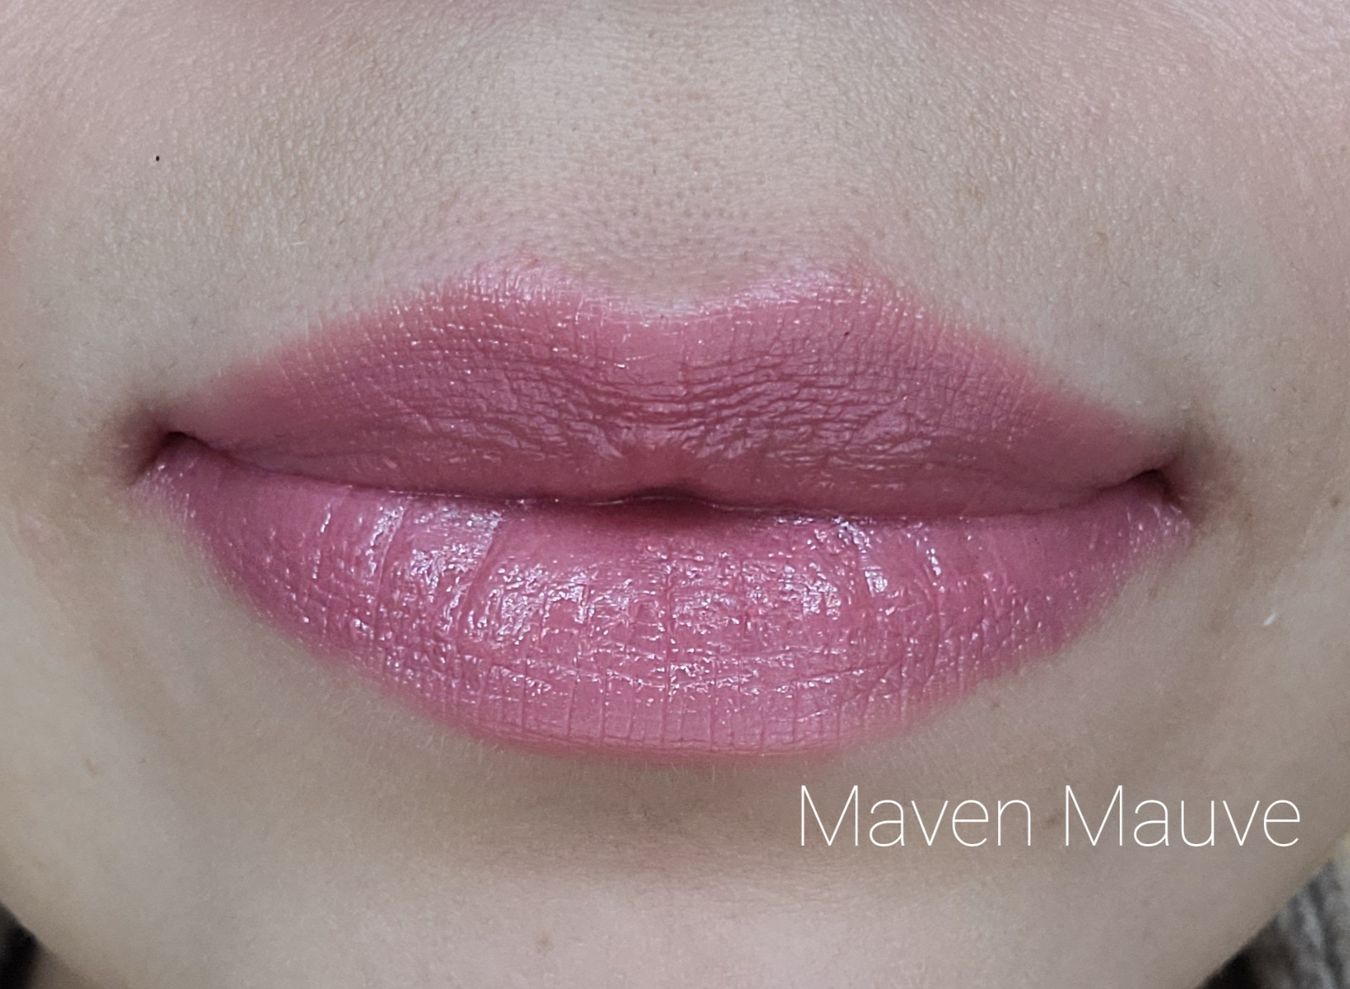 Image of close up lips wearing Lipstick in the shade called Maven Mauve. Dusty rose mauve shade by Red Apple Lipstick